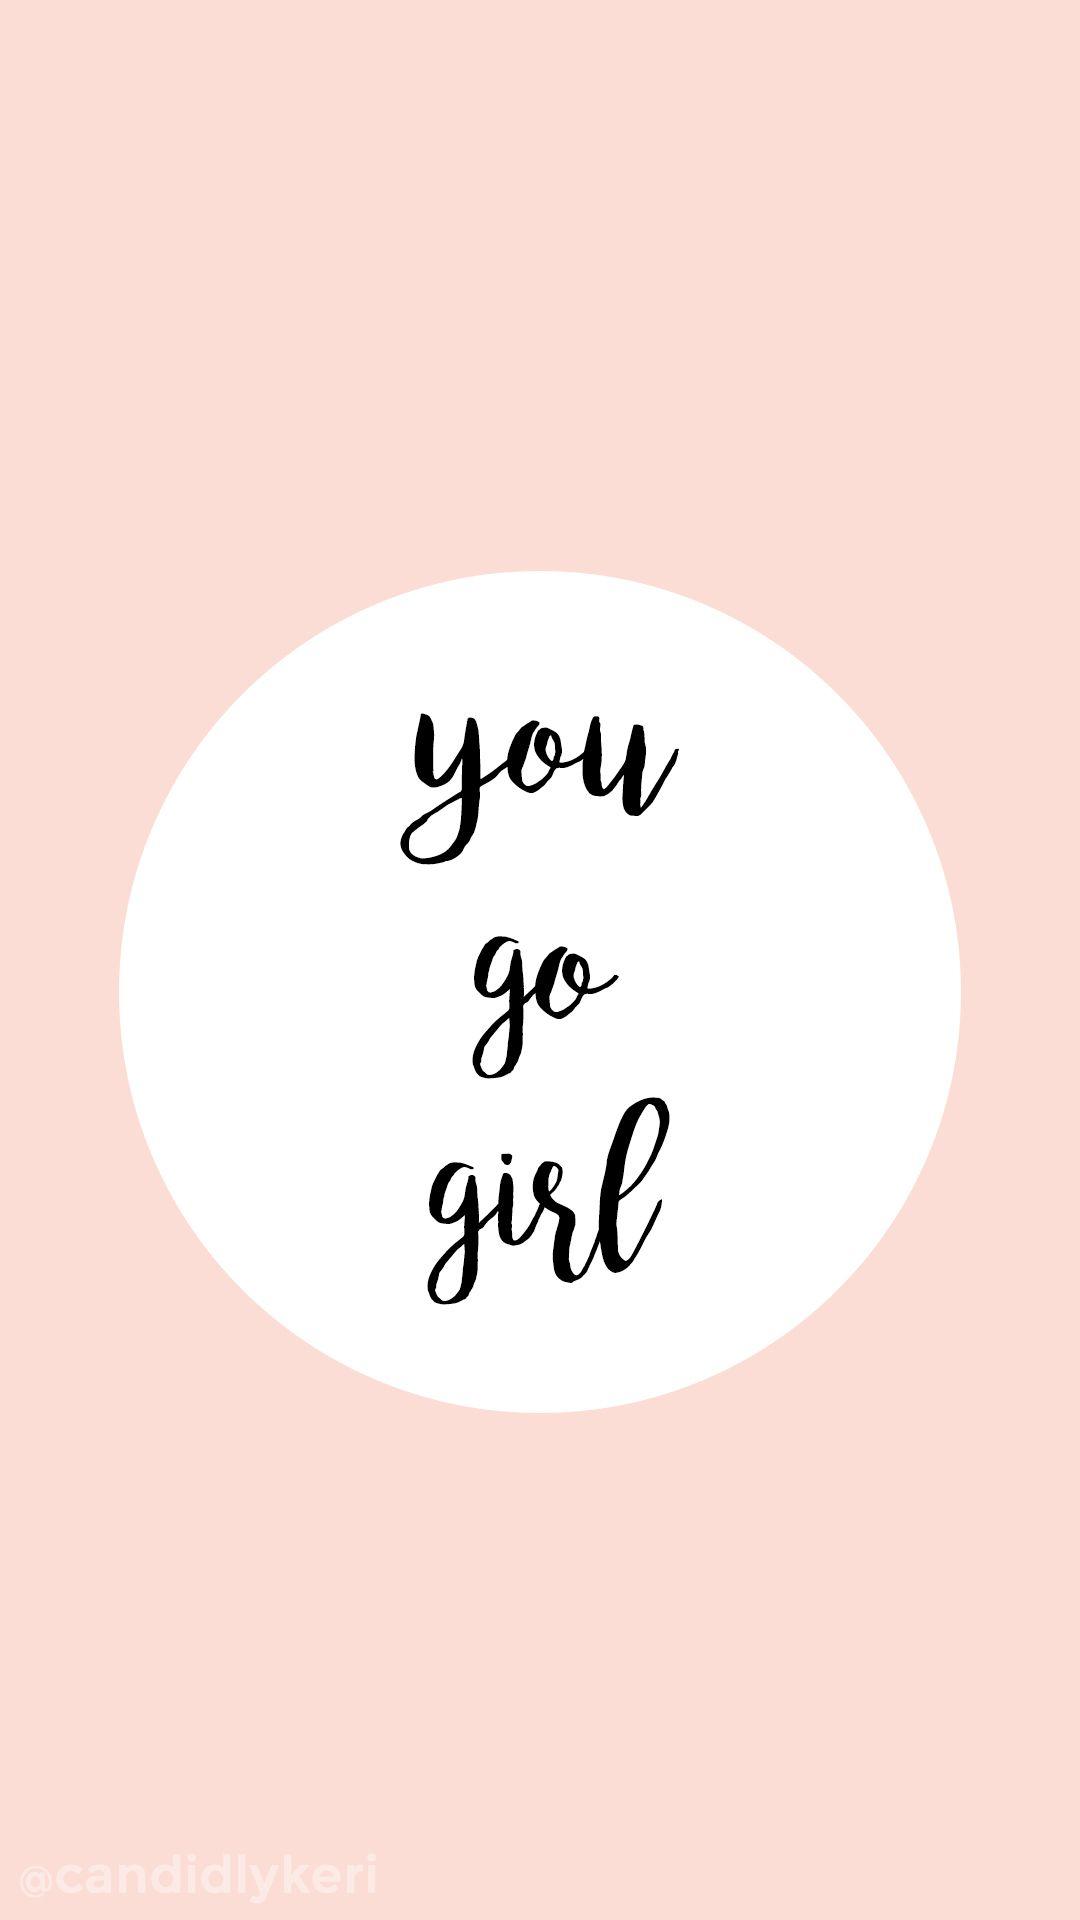 You Go Girl Pink quote inspirational background wallpaper